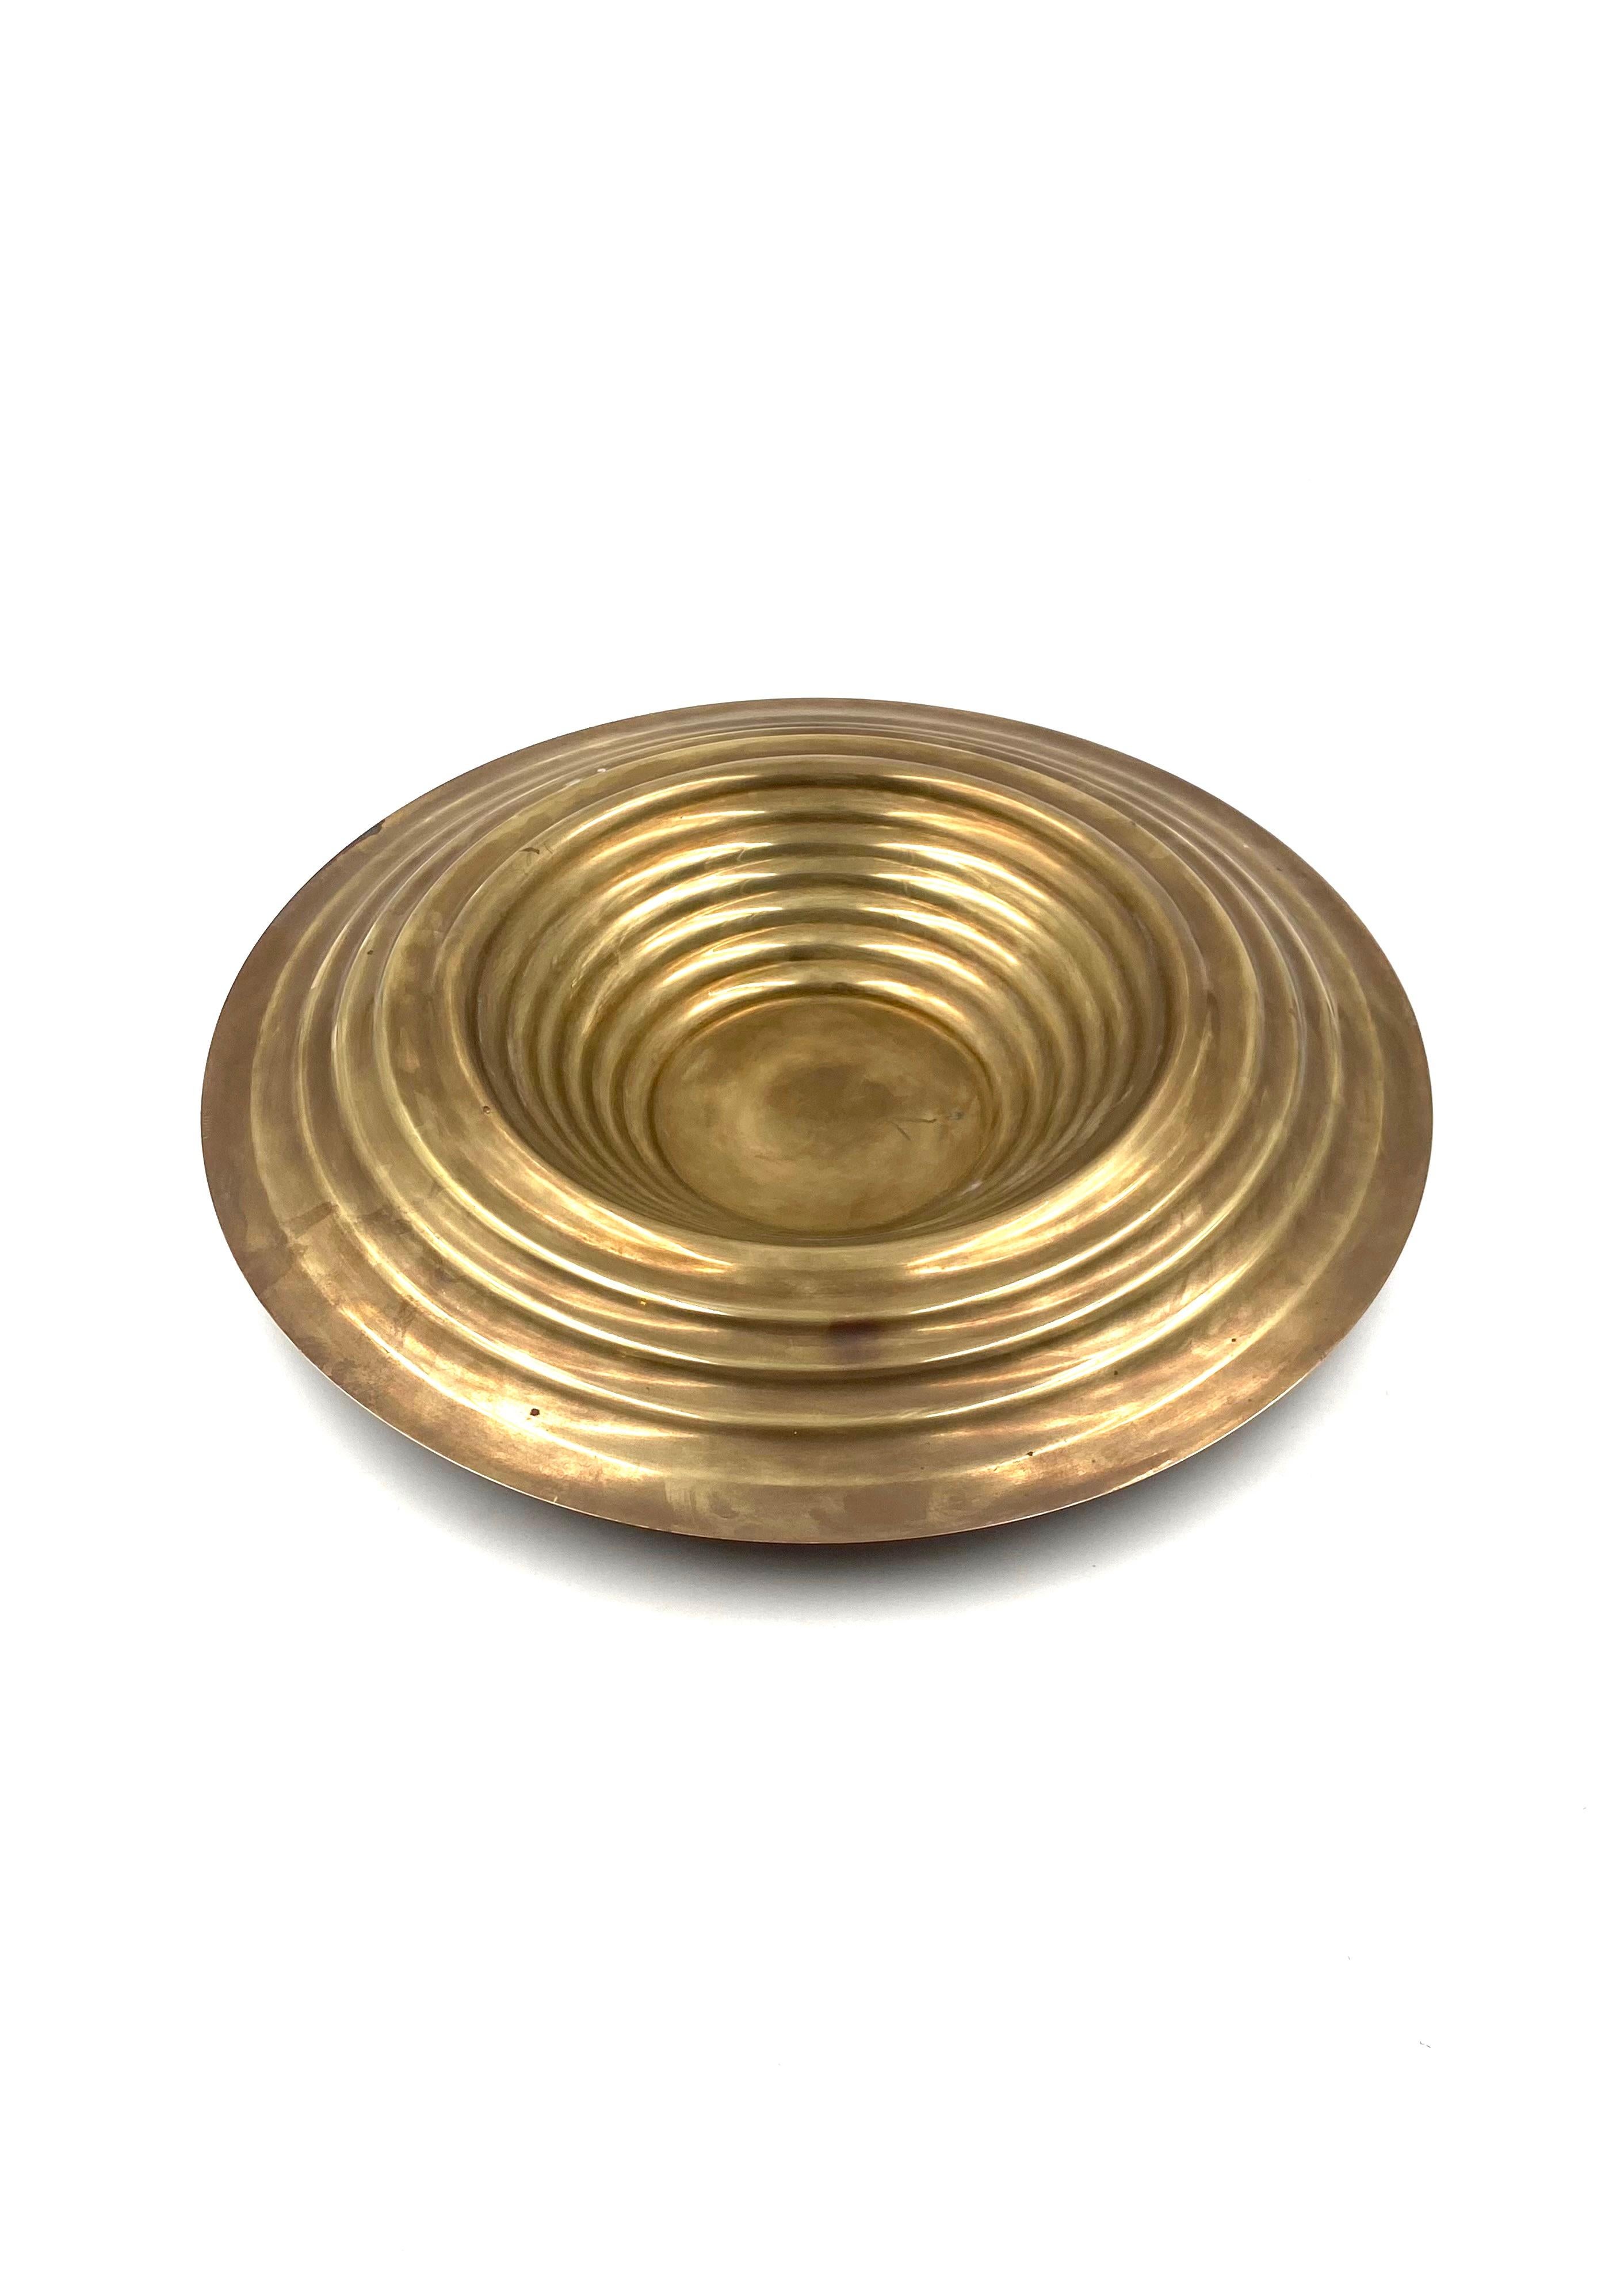 Large brass grooved centerpiece / vide poche, Italy 1970s For Sale 7